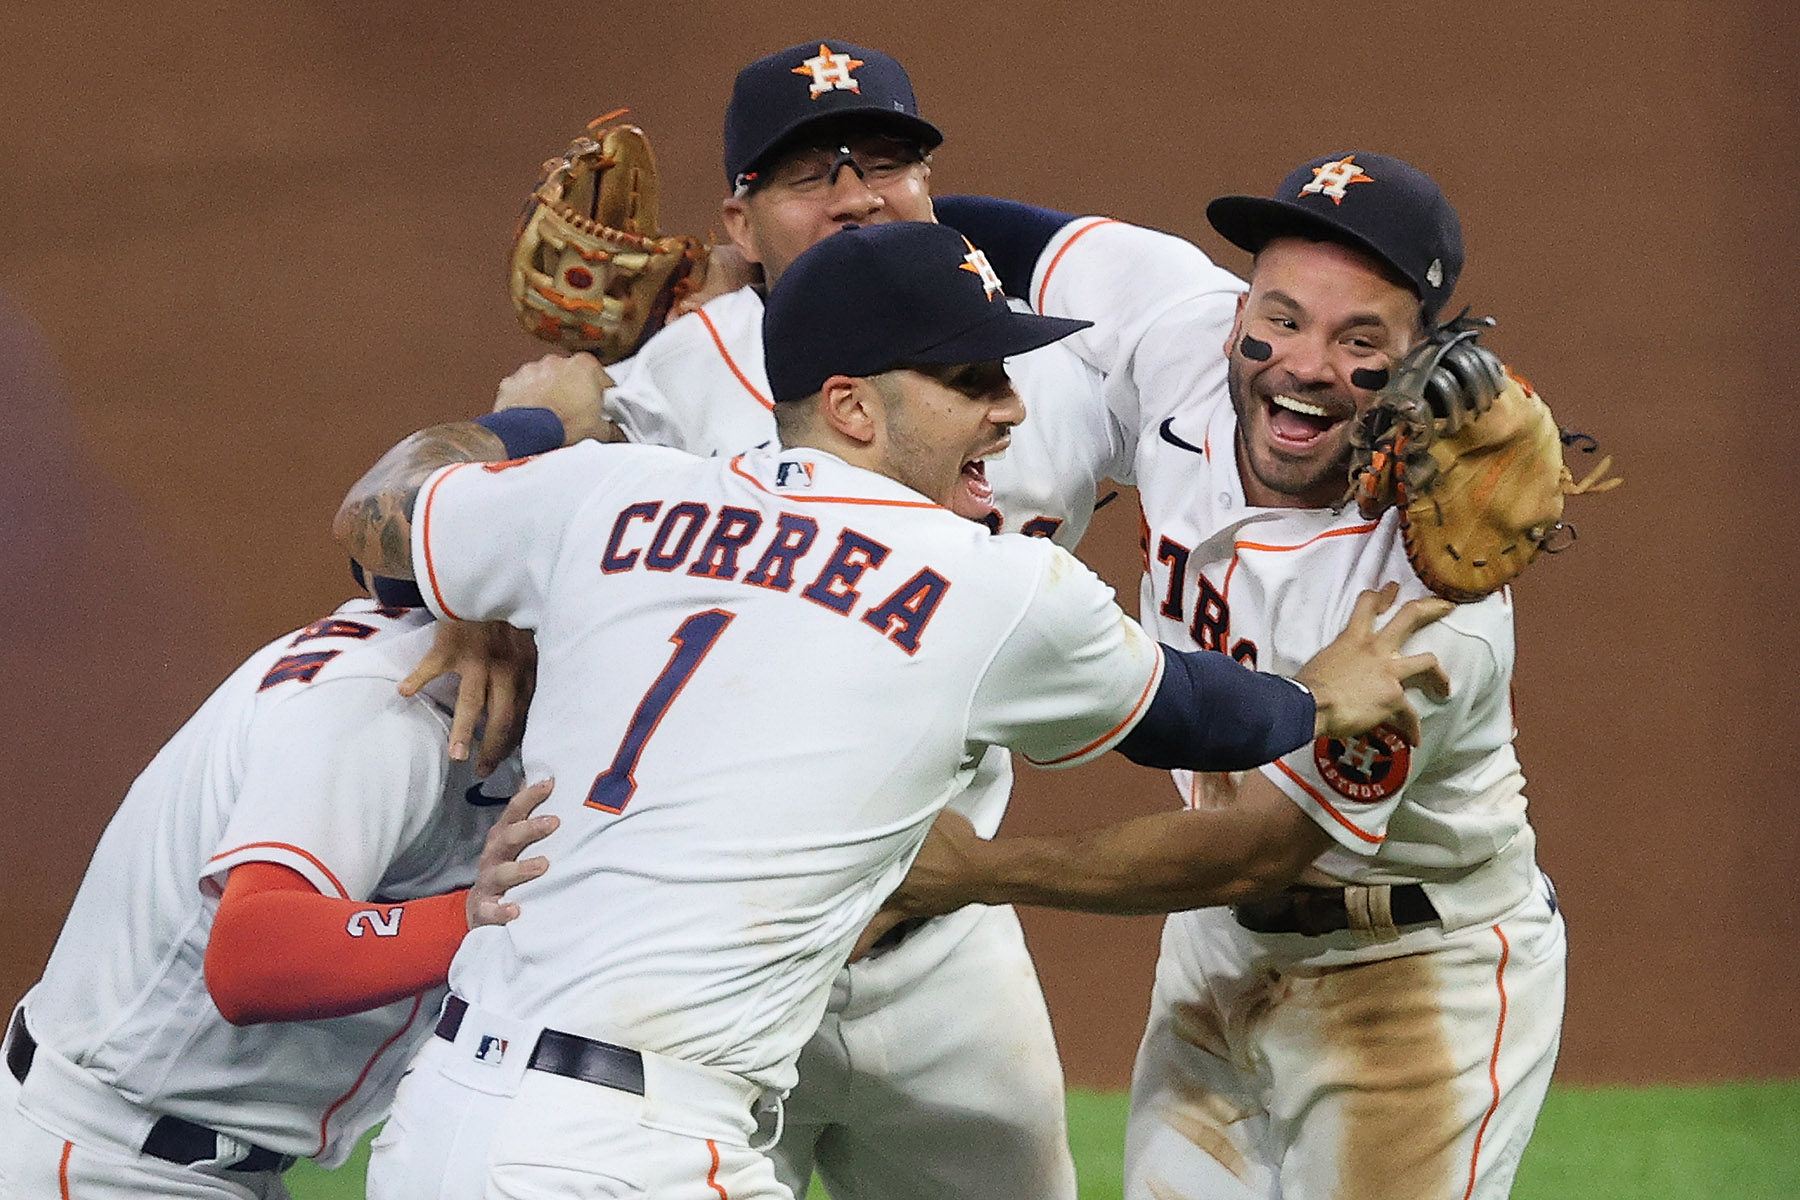 They’re not banging on trash cans anymore. So why are the Astros still so far ahead of the Yankees?